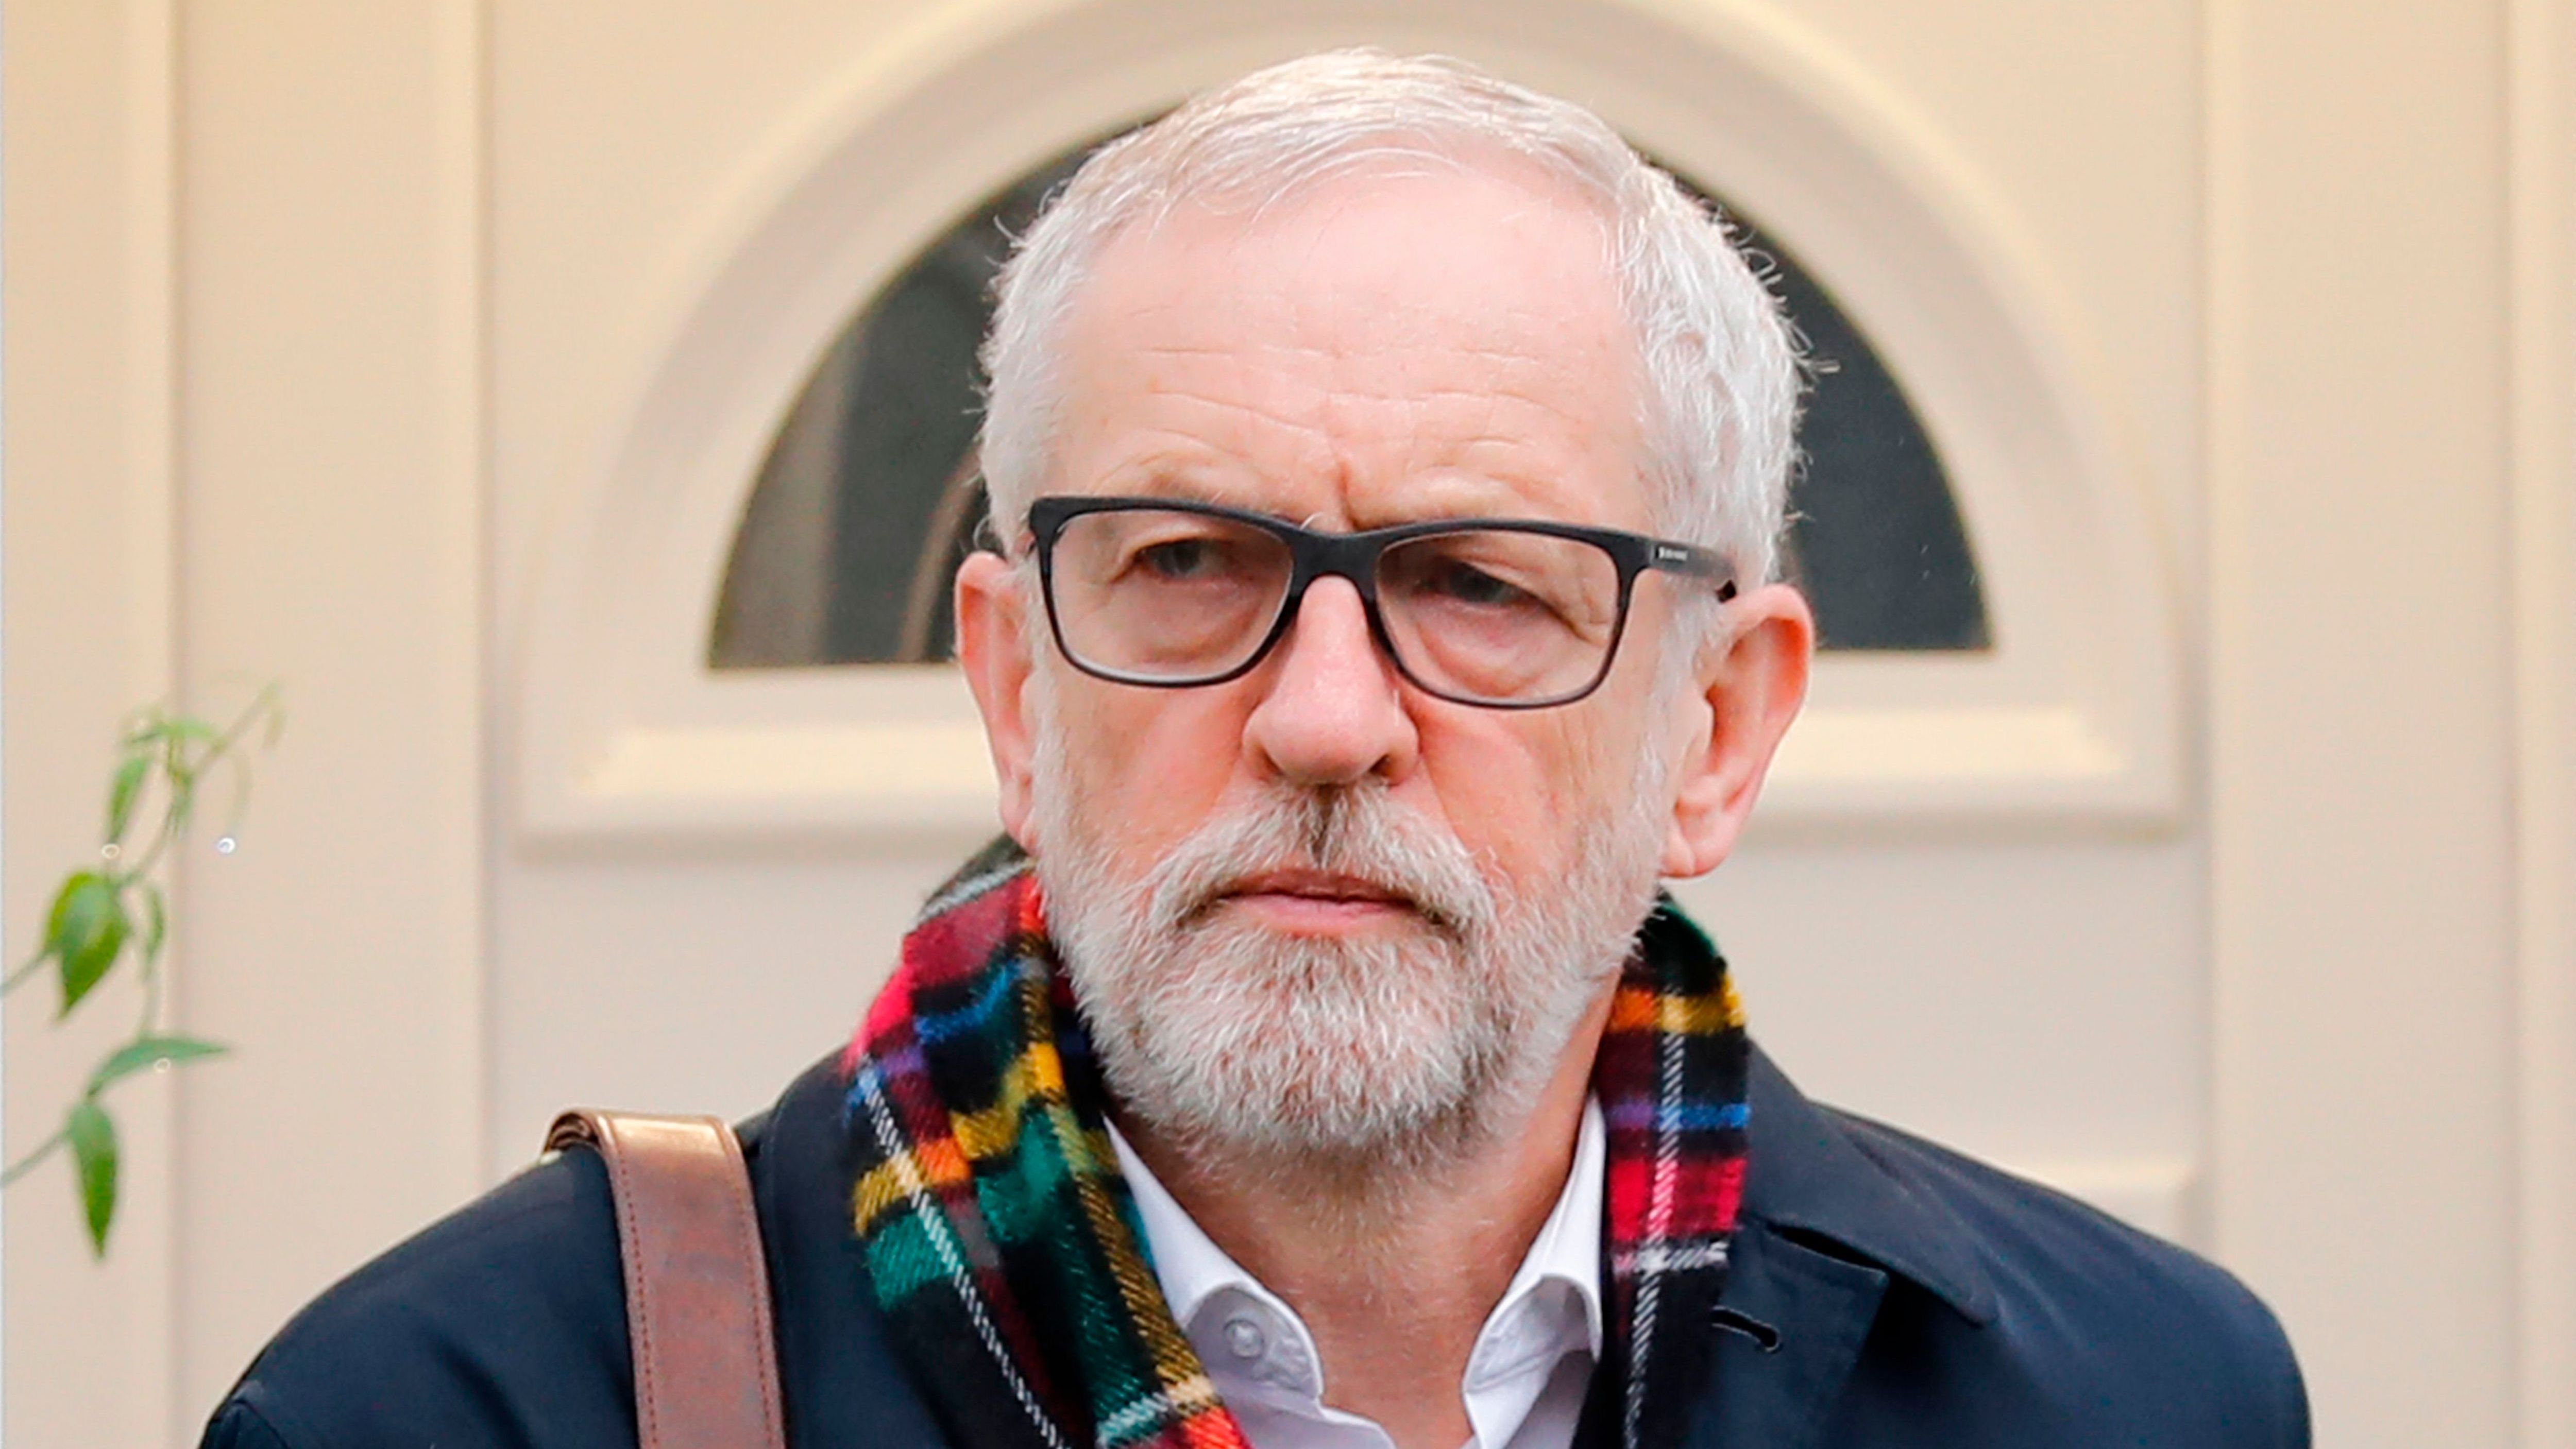 Jeremy Corbyn has sat as an independent MP since 2020, but has said he wants to stand as Labour MP